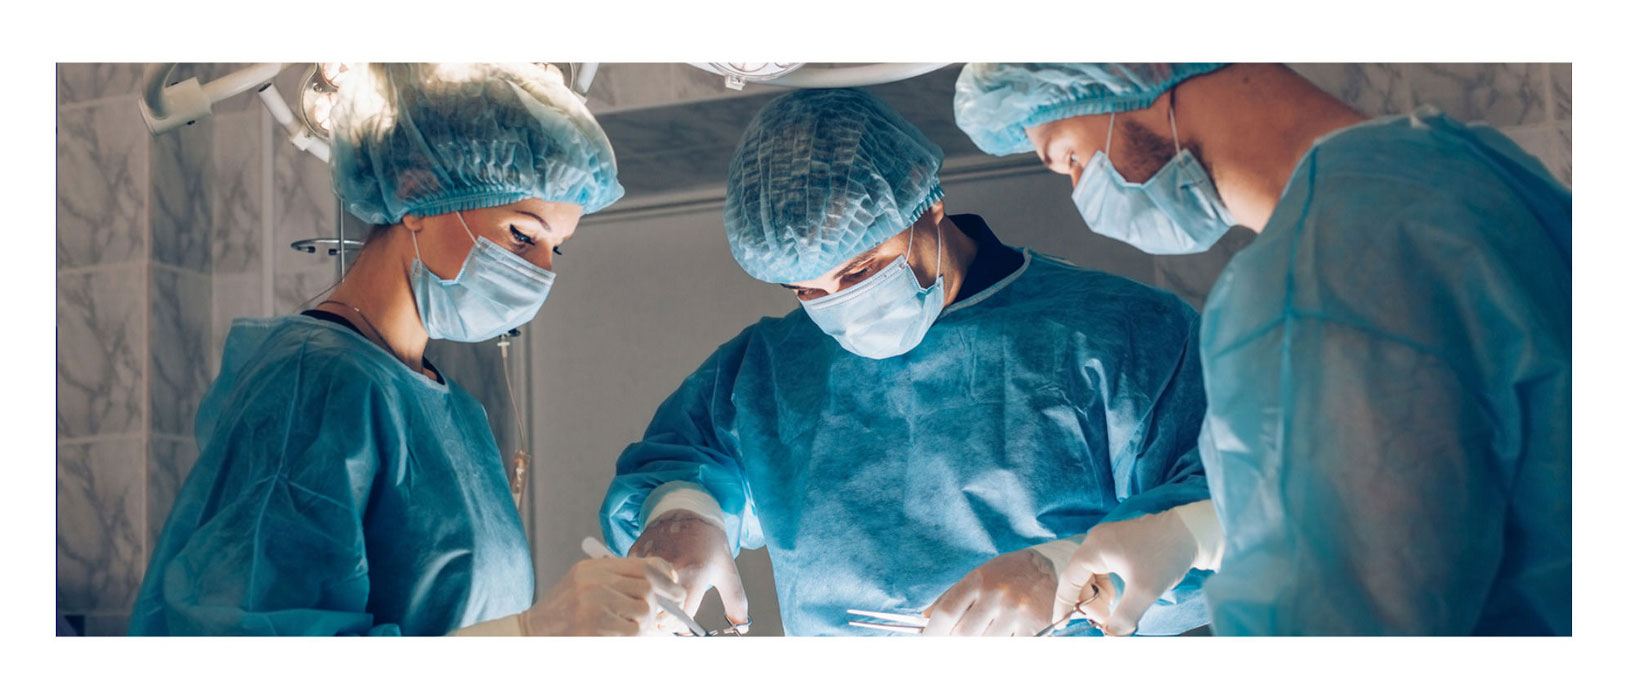 Surgeons Operating on a Patient.